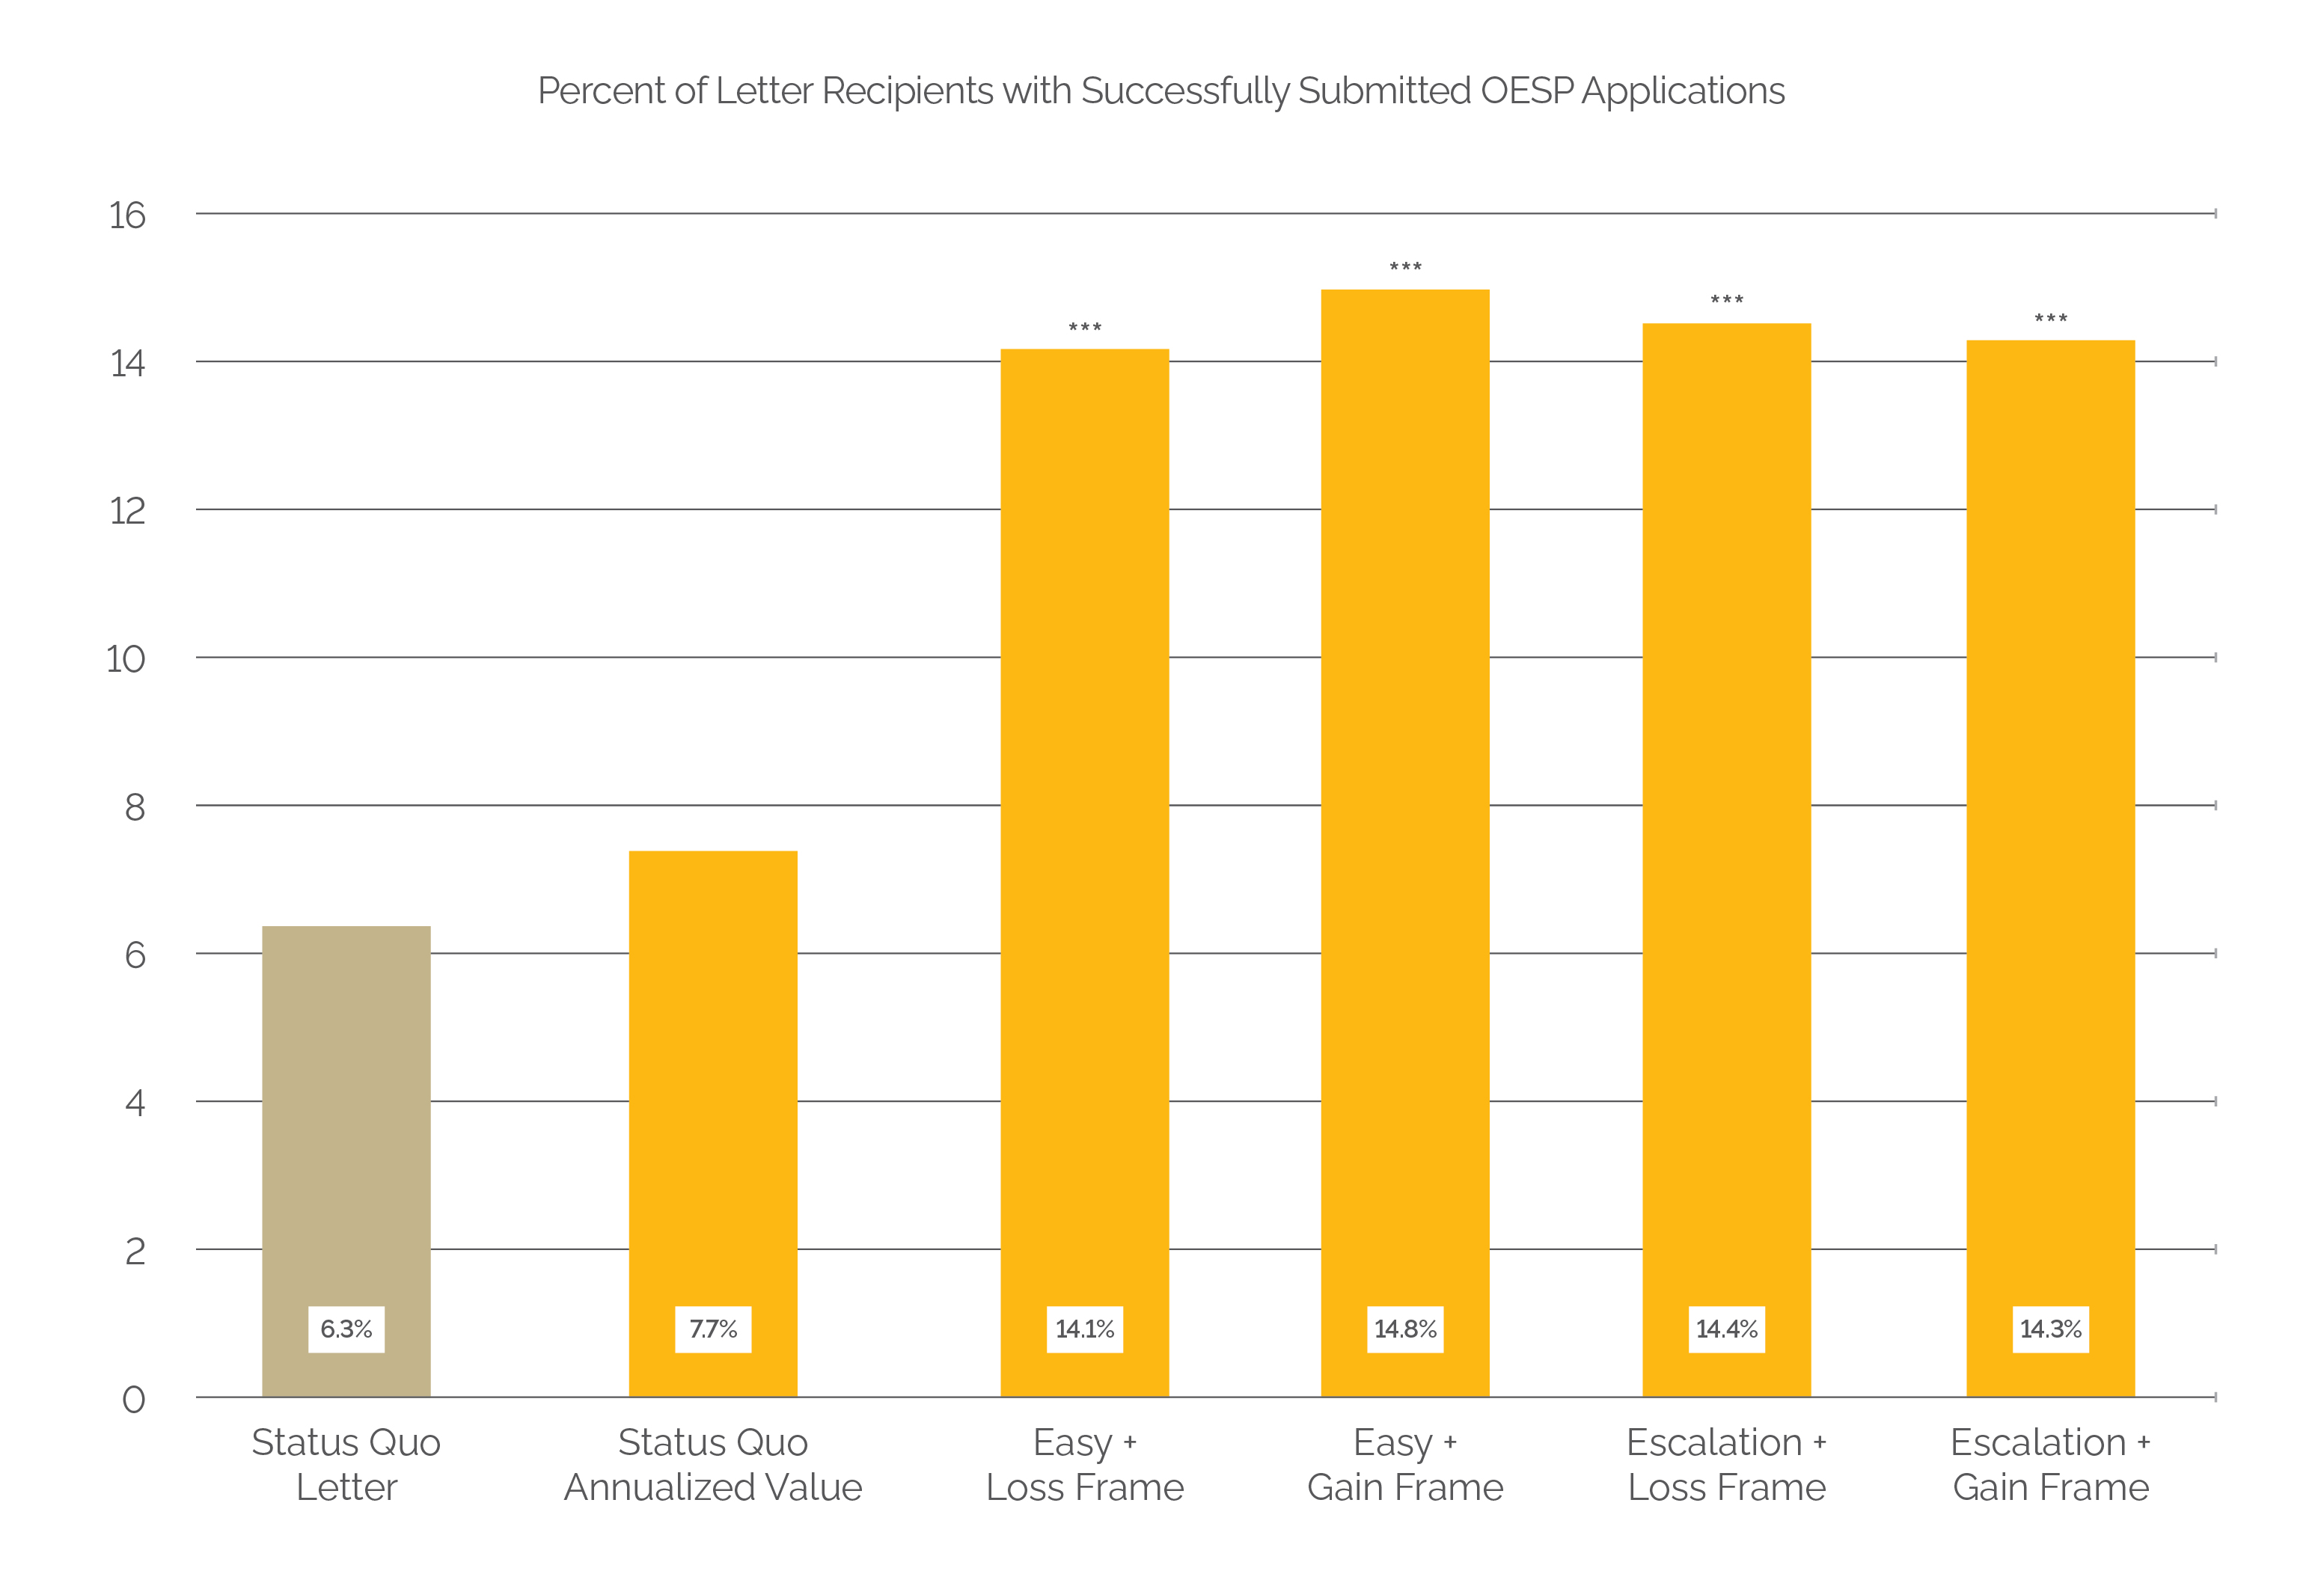 Graph showing the percent of letter recipients with successfully submitted OESP applications by treatment